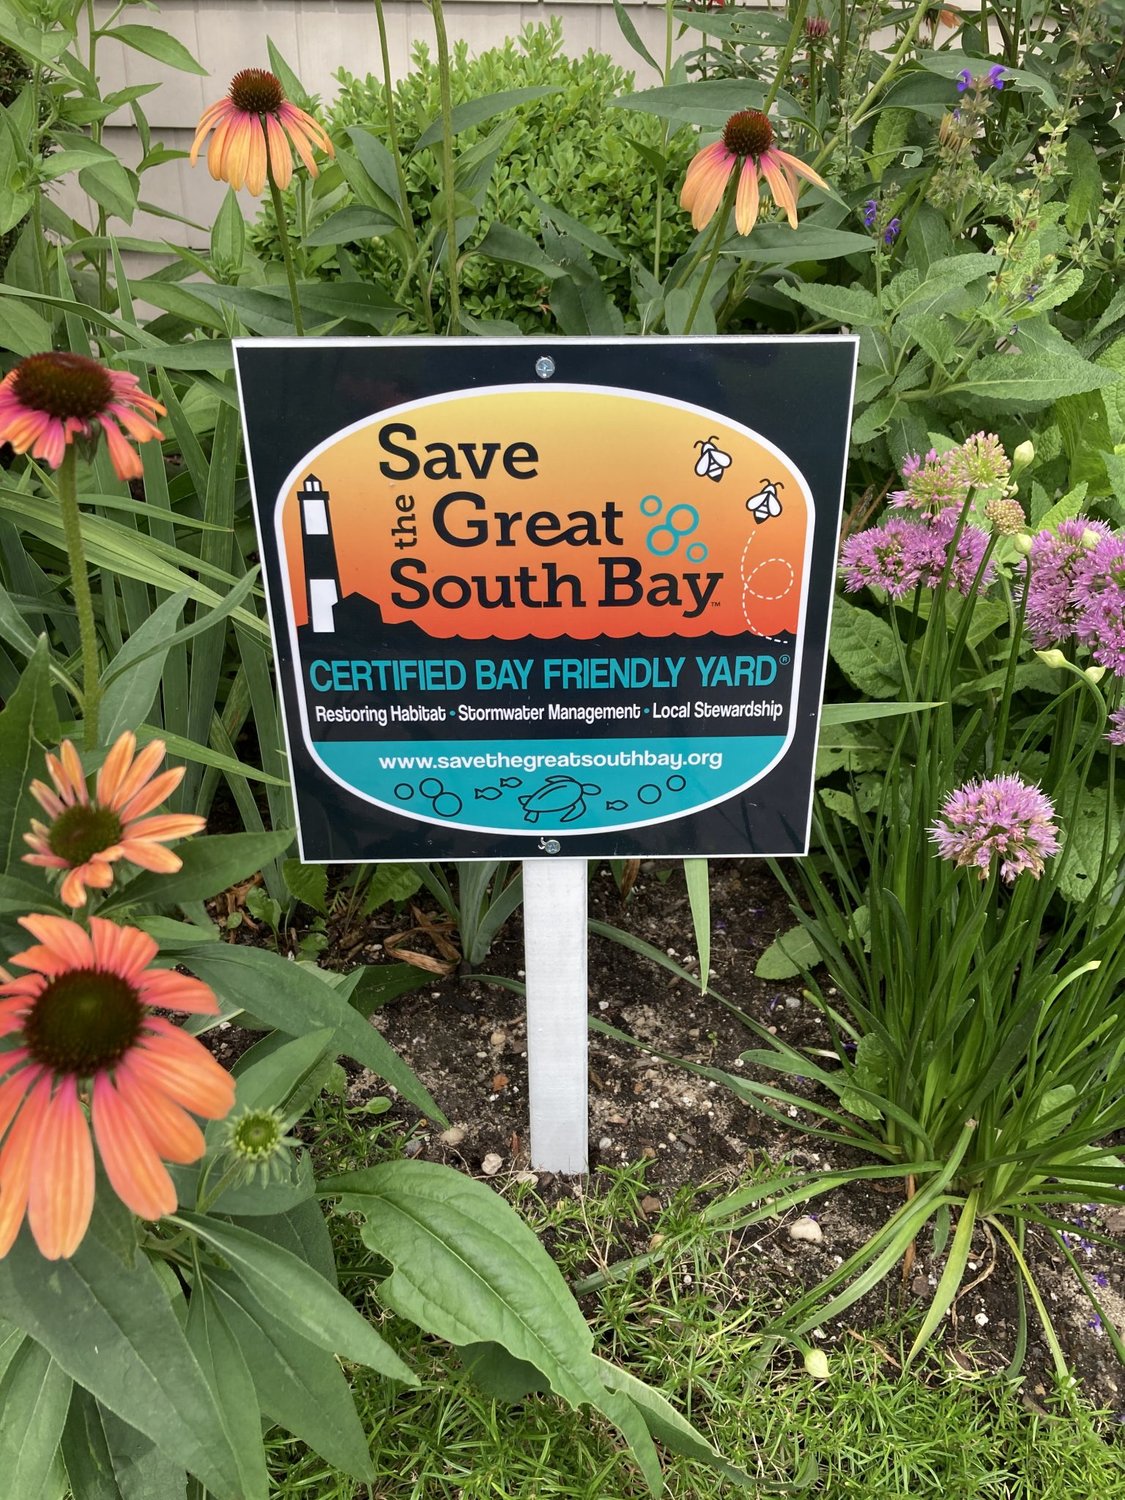 Three steps to a bay-friendly yard include managing stormwater, becoming a steward of your land and restoring habitats.